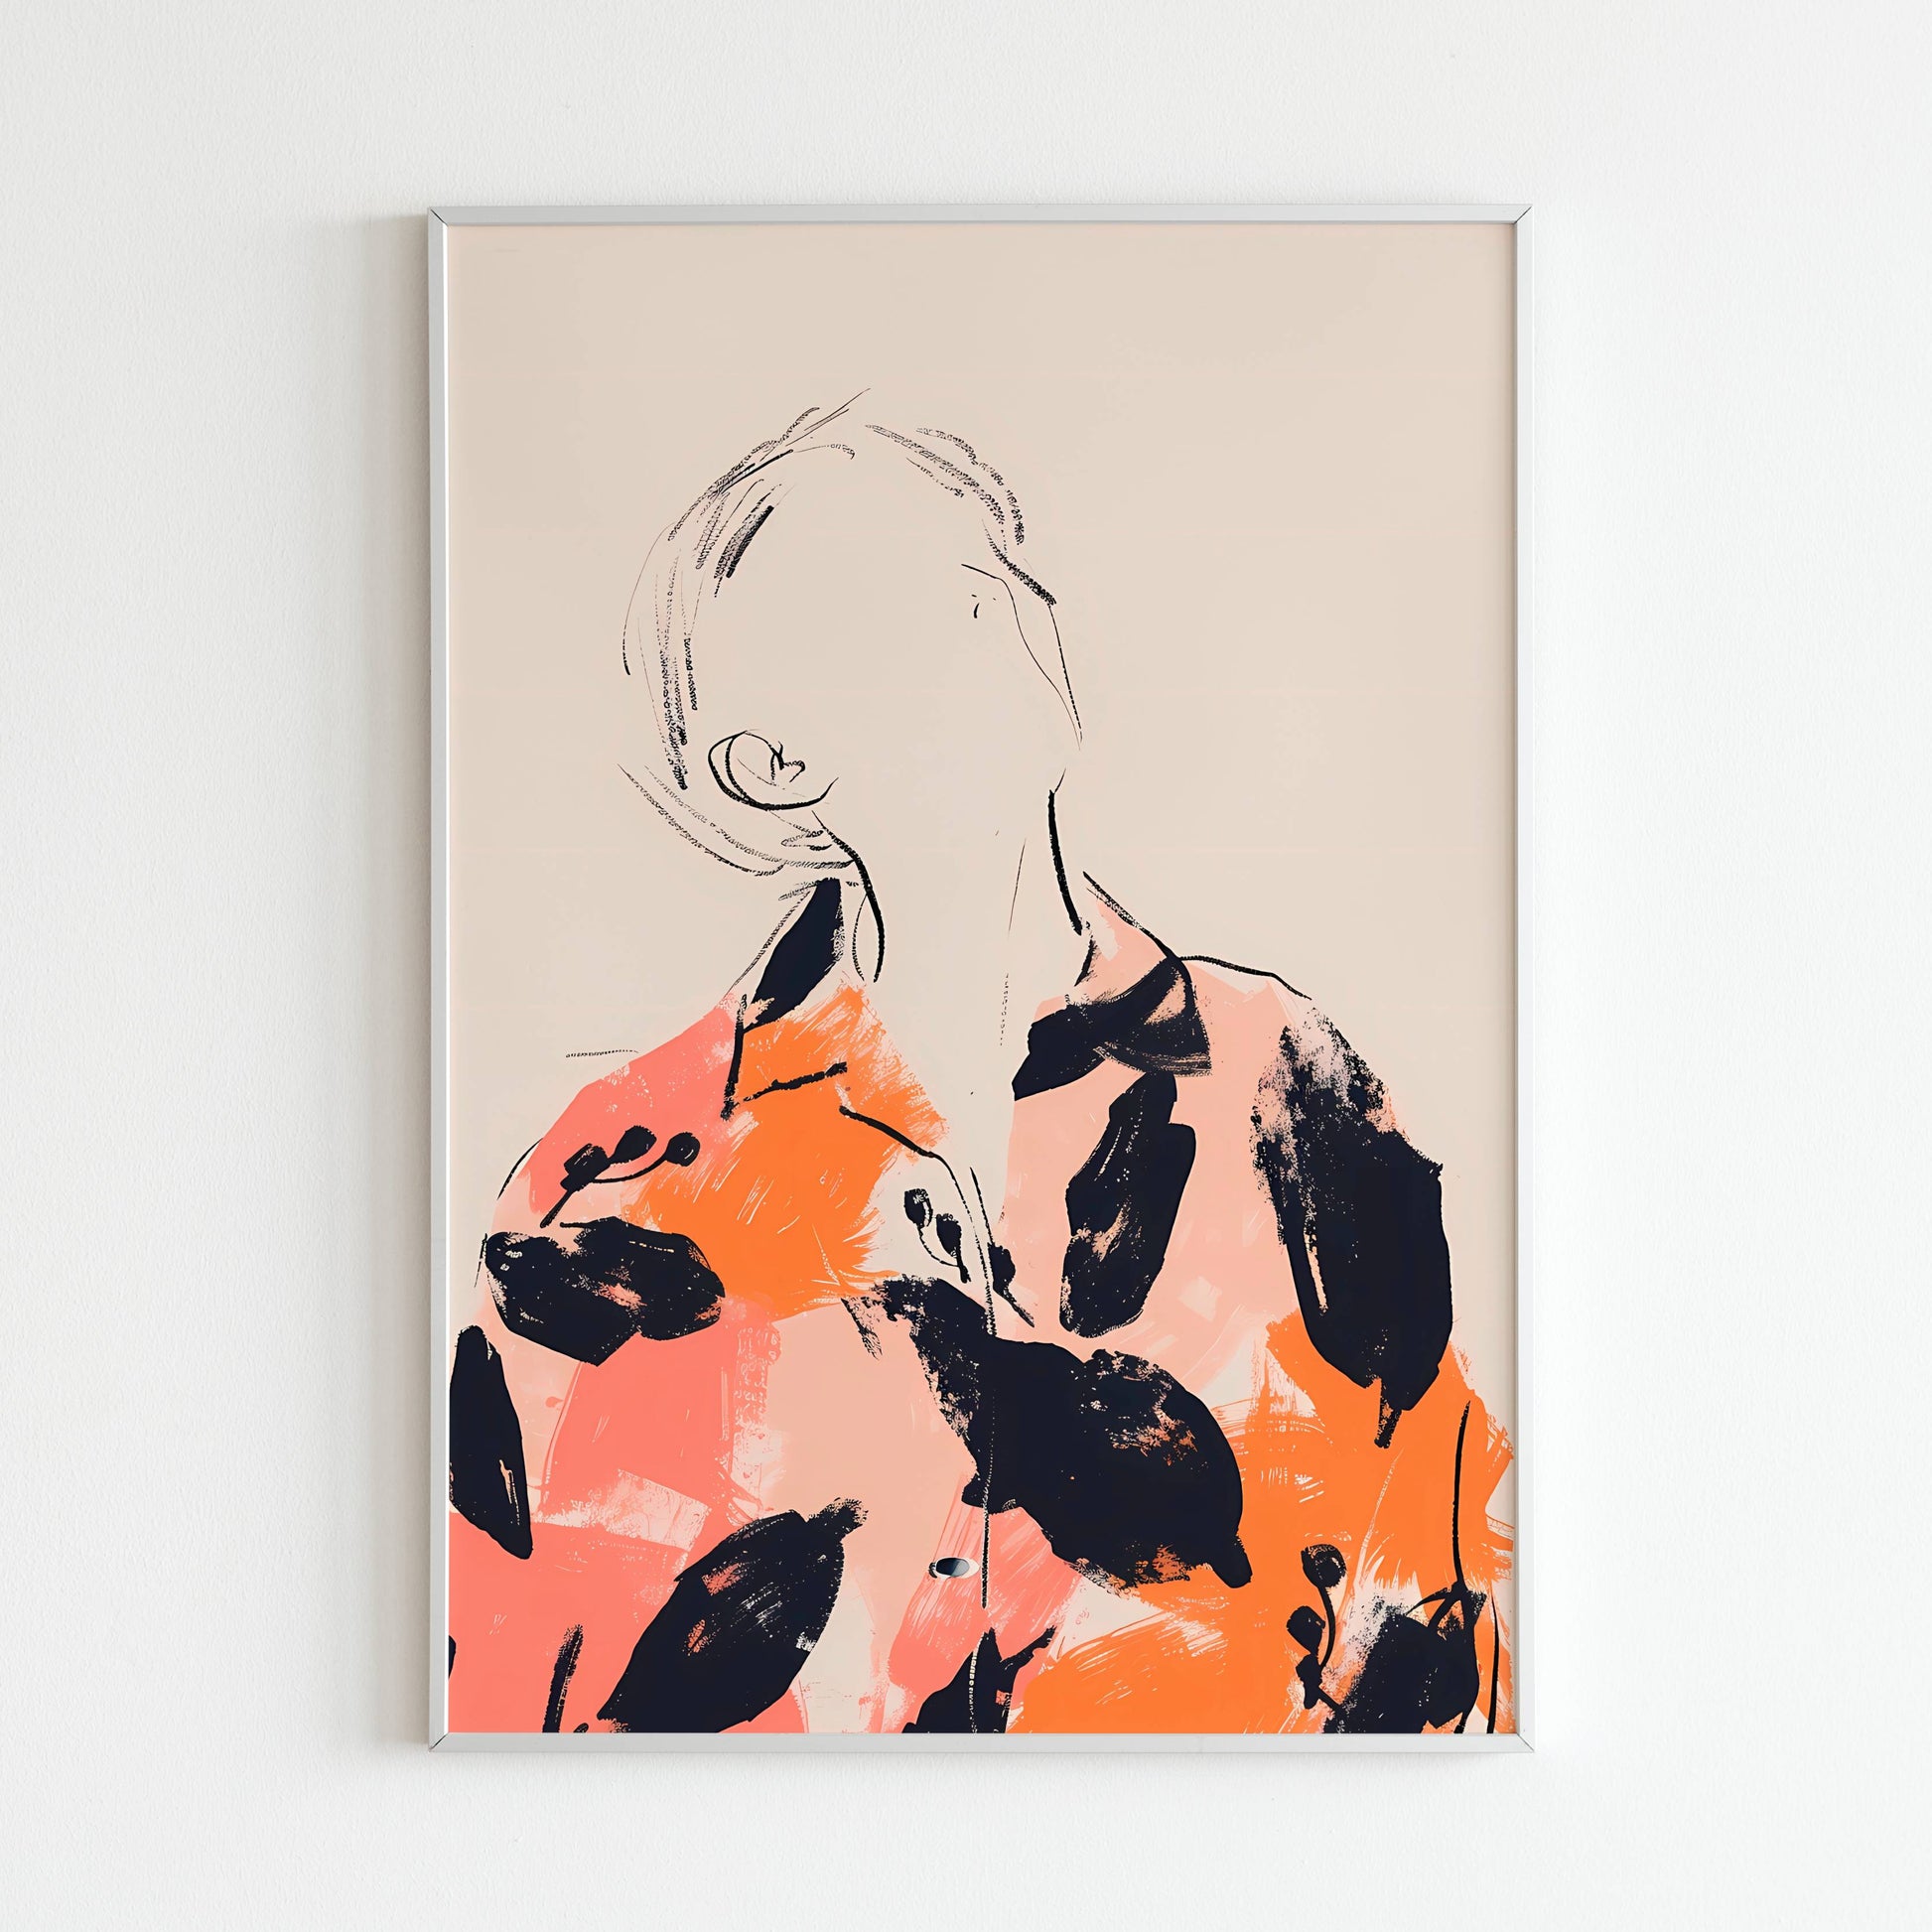 This beautiful minimalist poster showcases fashion in a simple yet elegant style. Arrives ready to hang.